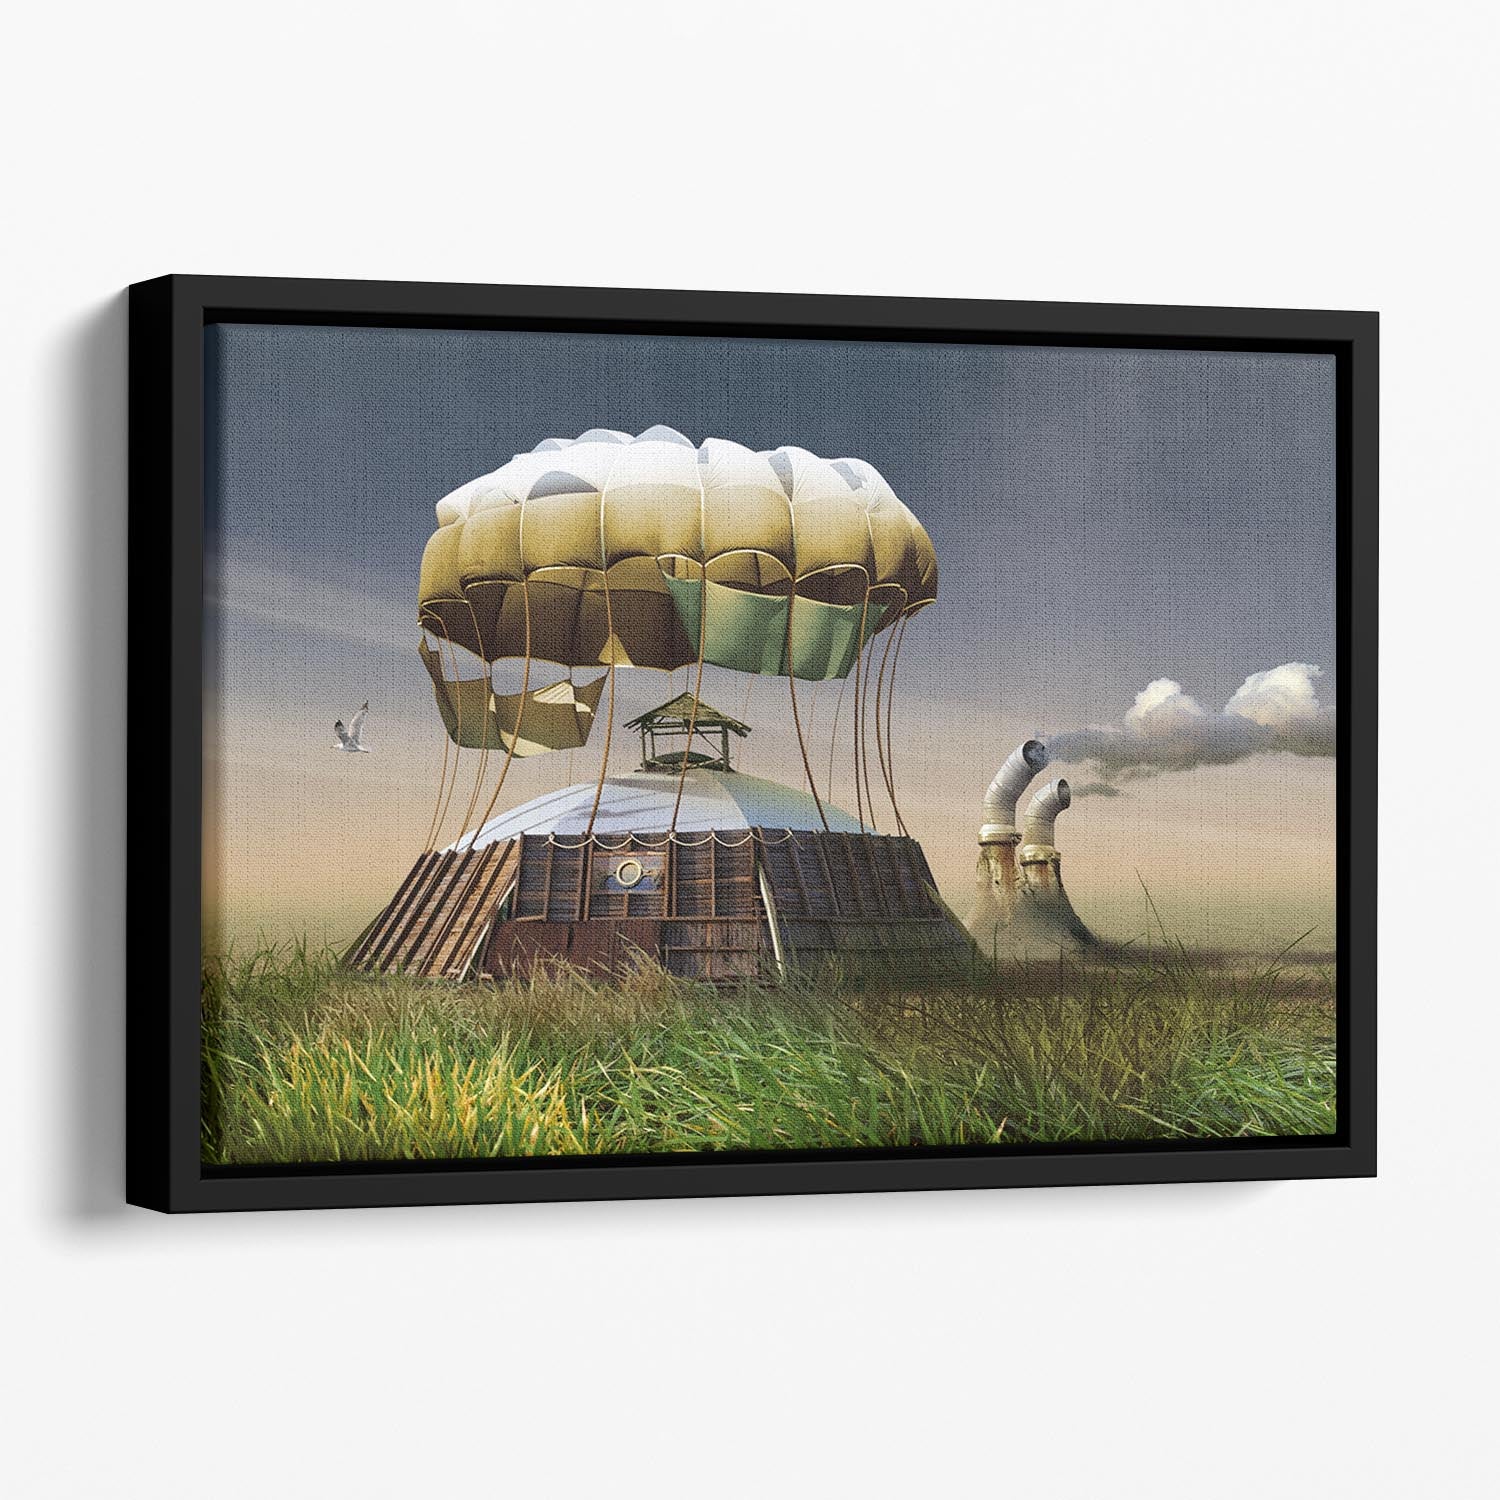 The home Floating Framed Canvas - 1x - 1